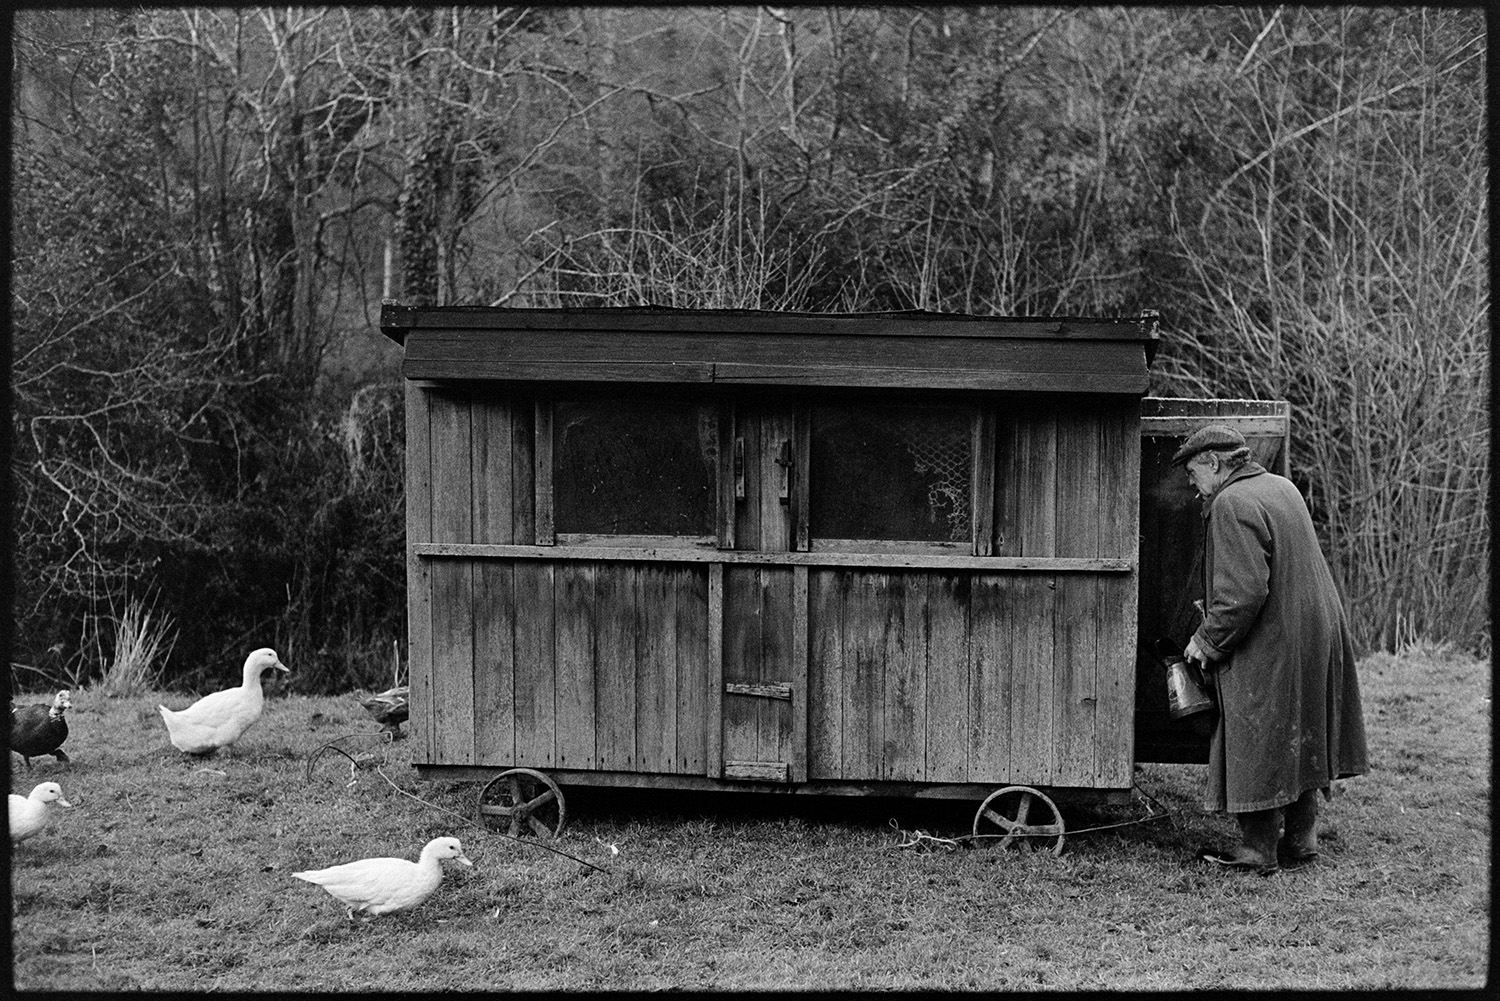 Farmer putting ducks to bed in poultry house, sheep in field. 
[Ivor Brock putting ducks o bed in a wooden poultry house on wheels in a field at Millhams, Dolton.]